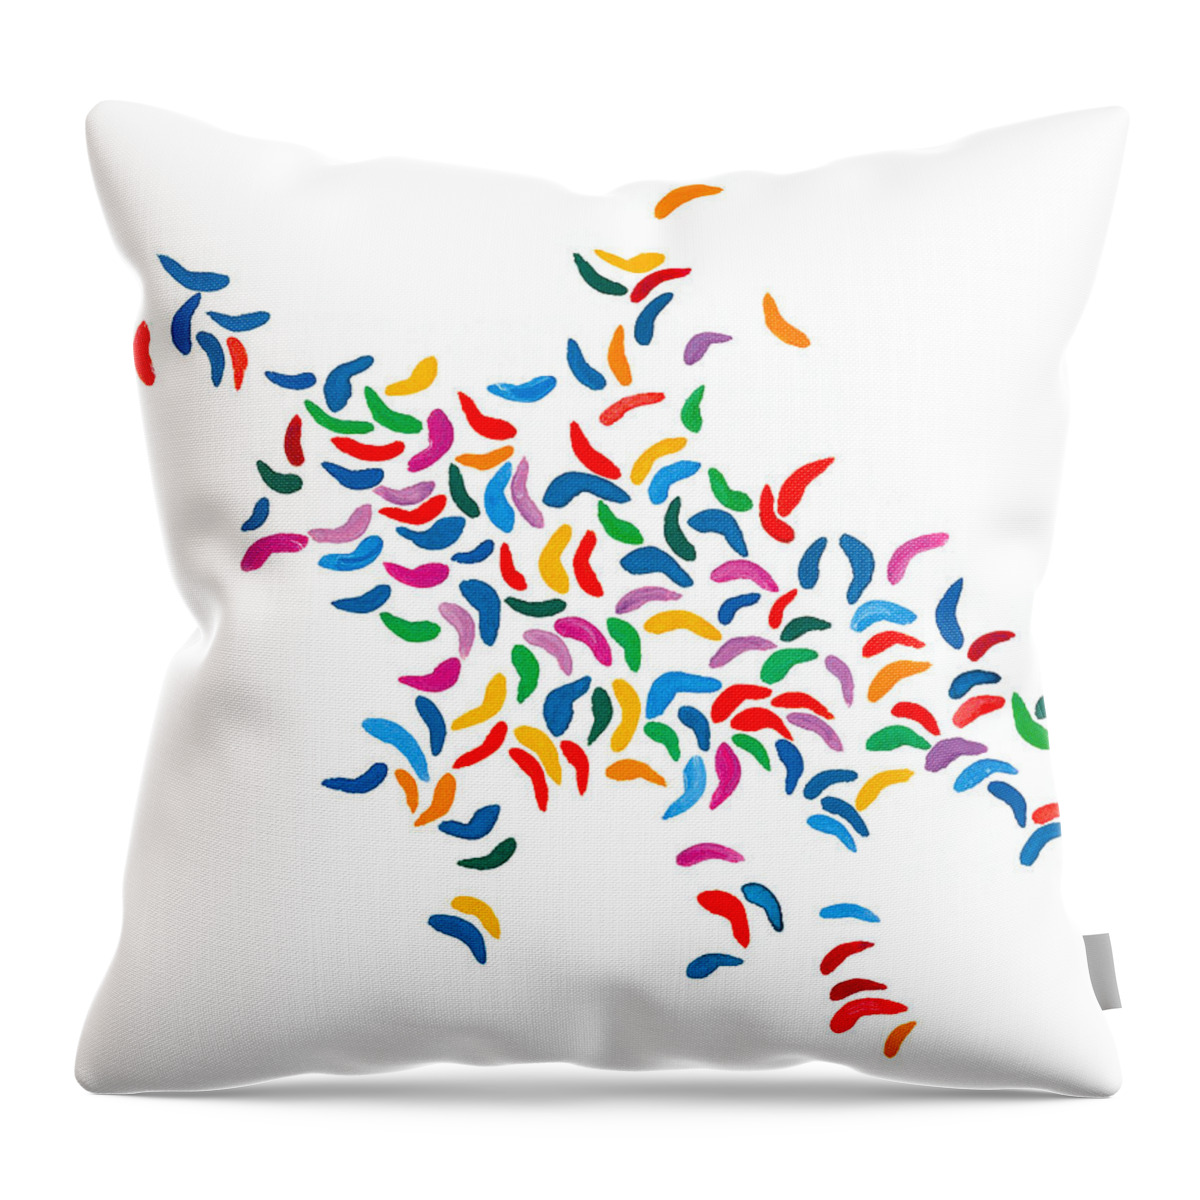 Feathers Throw Pillow featuring the painting Feathers by Bjorn Sjogren